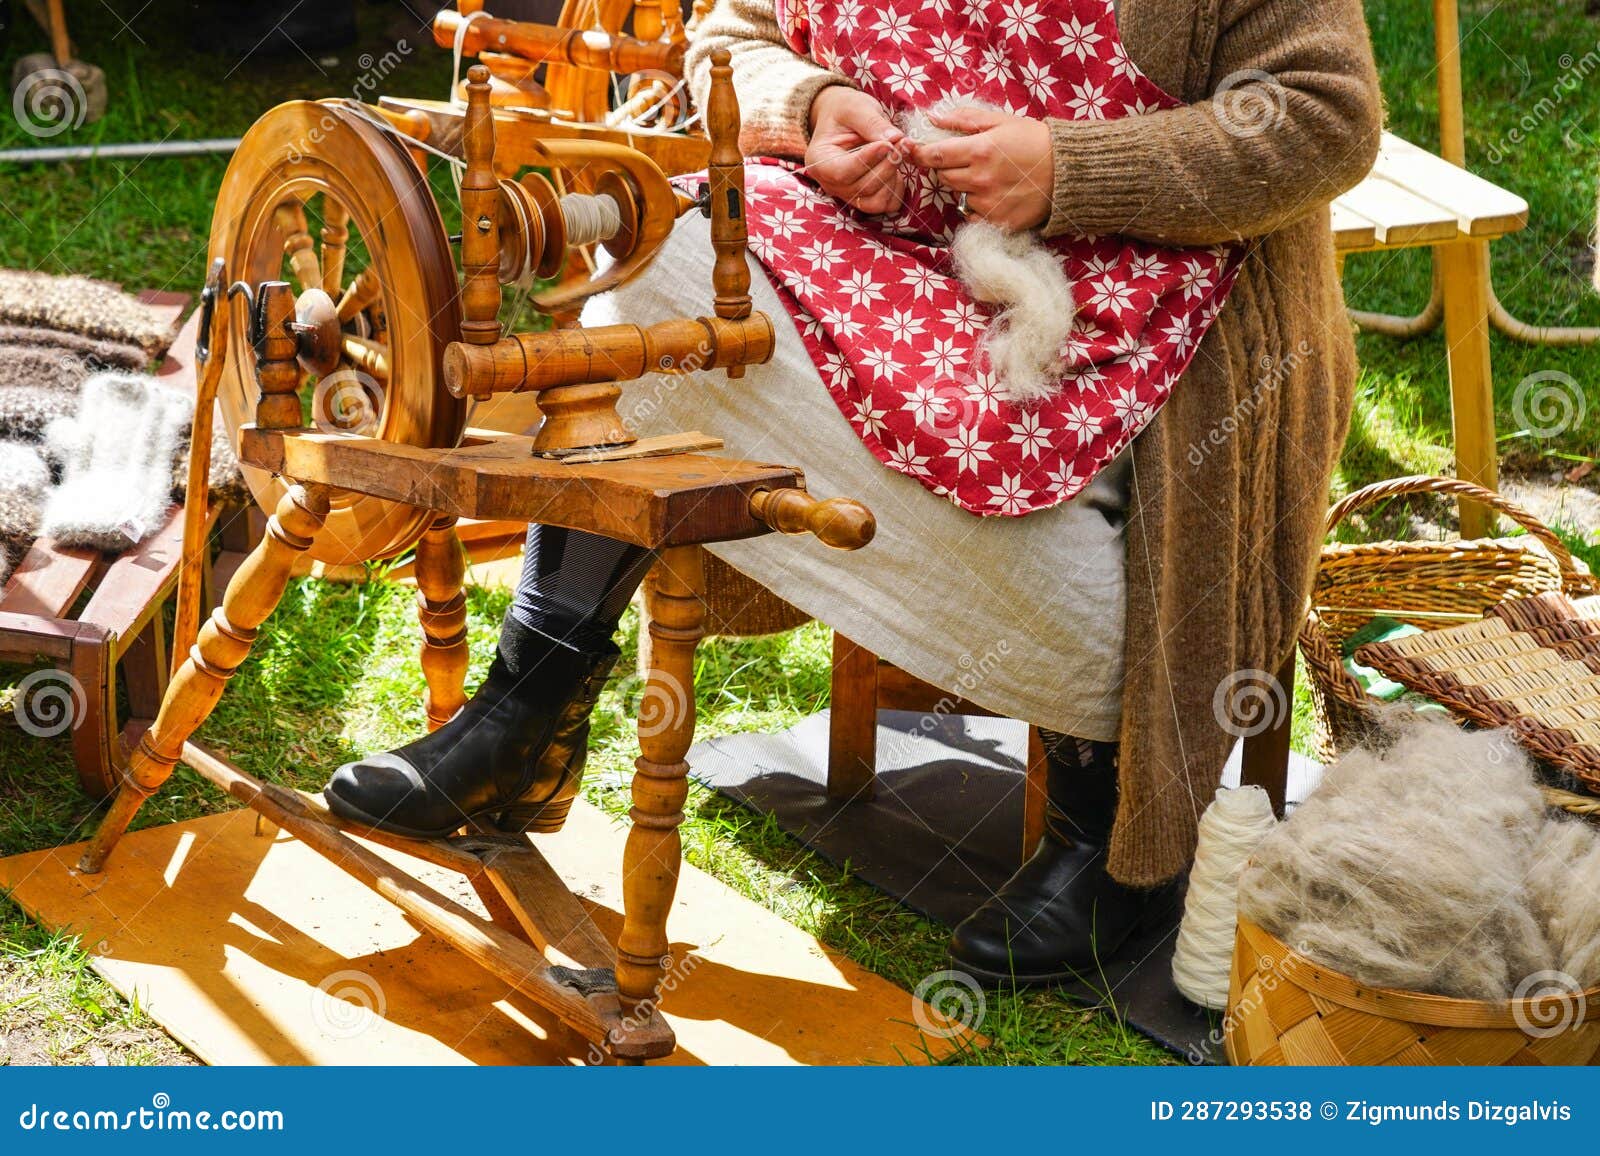 Spinning Wheel For Making Yarn From Wool Fibers. Vintage Rustic Equipment, Stock image